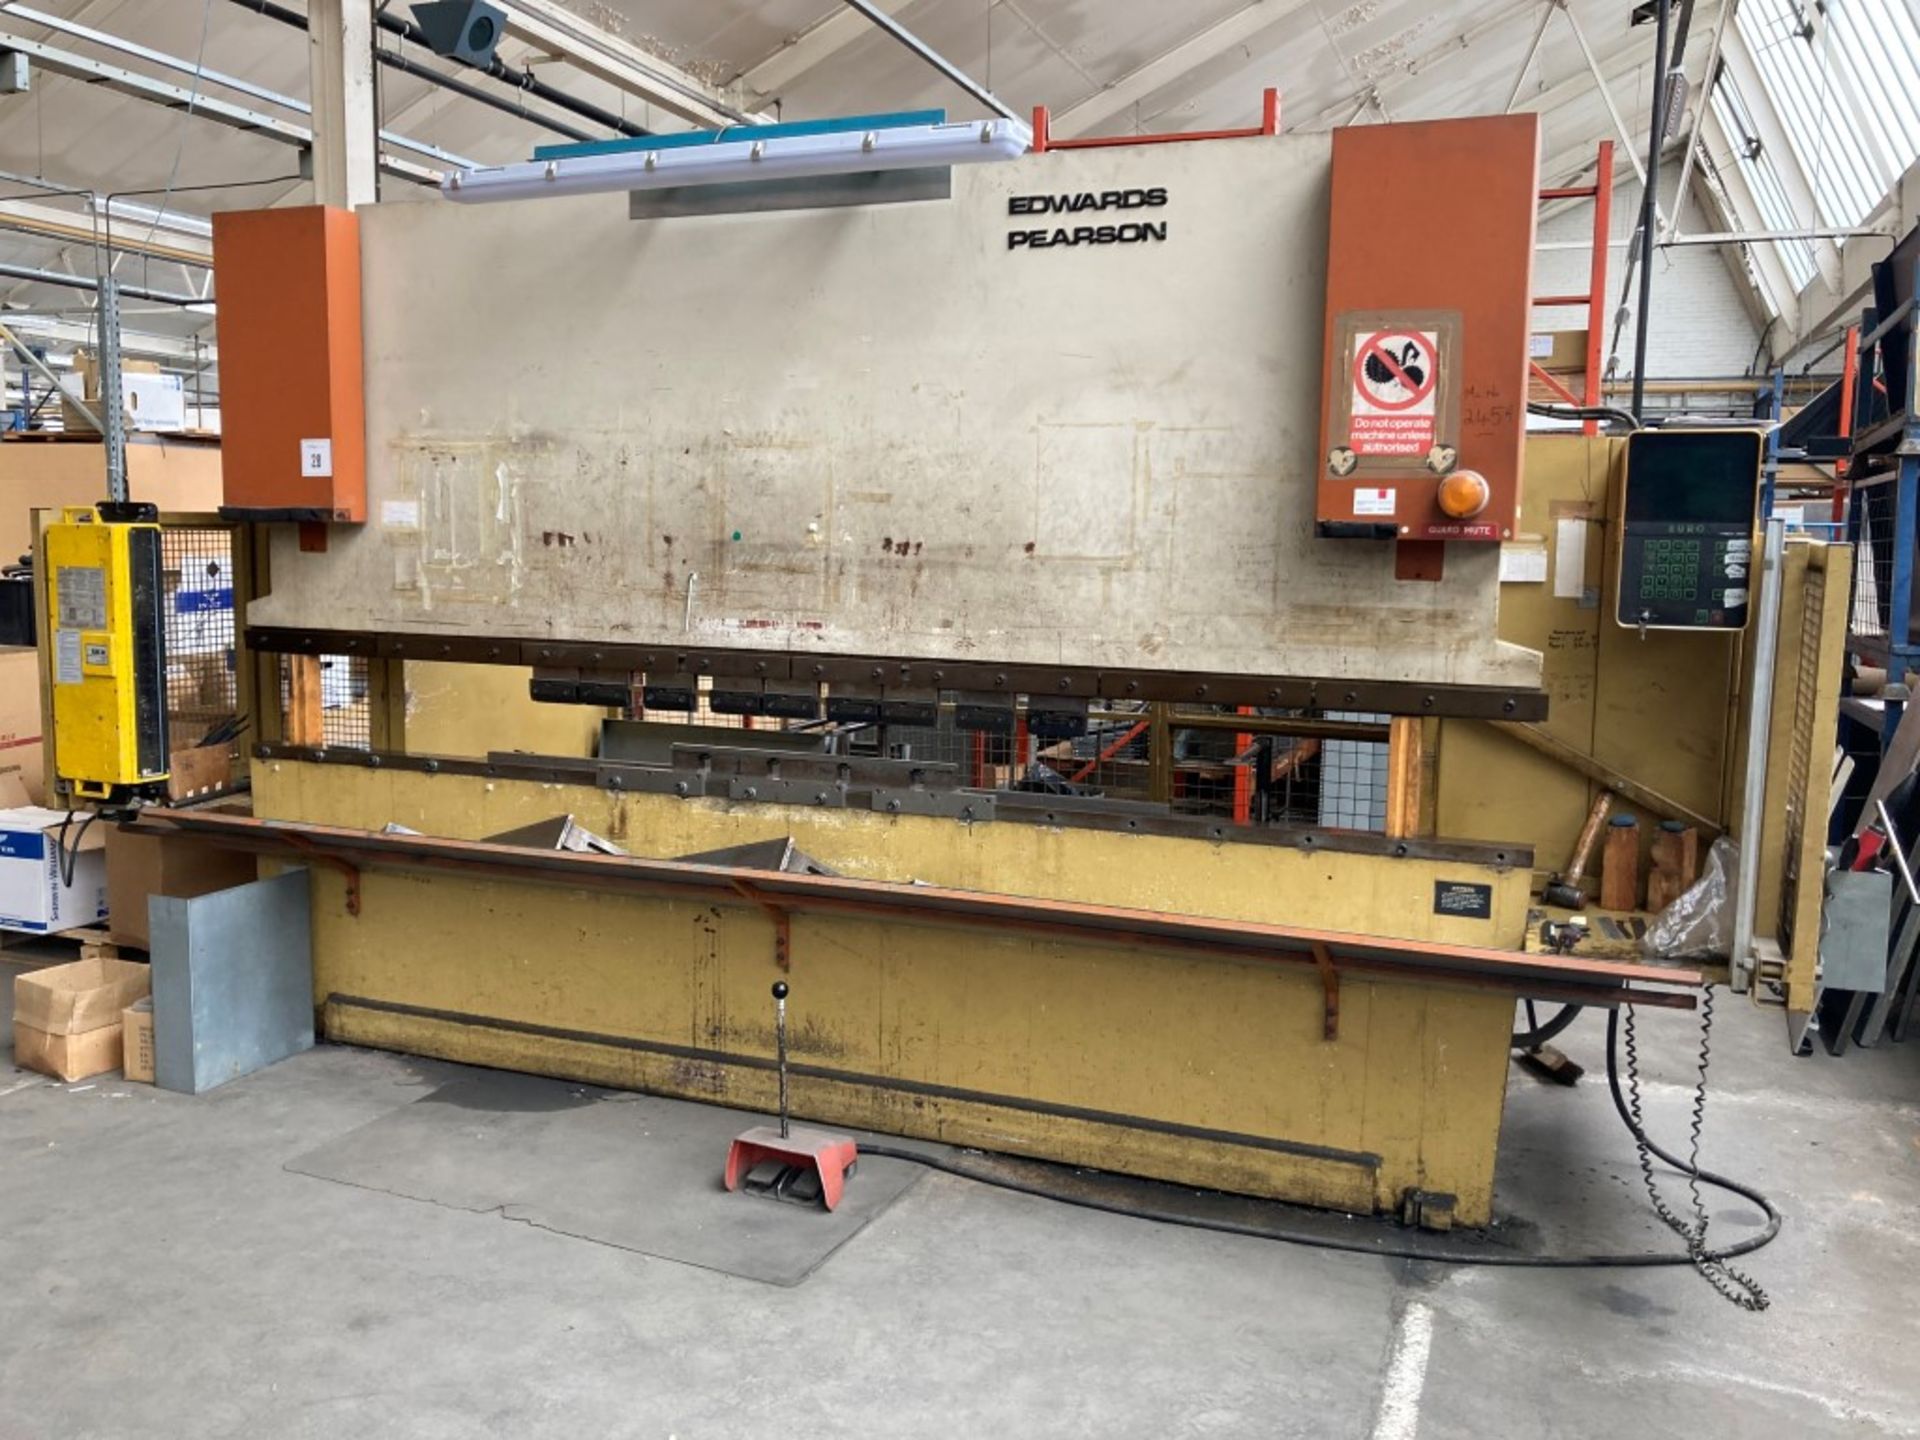 Edwards Pearson Press Brake 150 TONS, 3700mm Width with Sick Light Guard & Euro Digital Read Out, Se